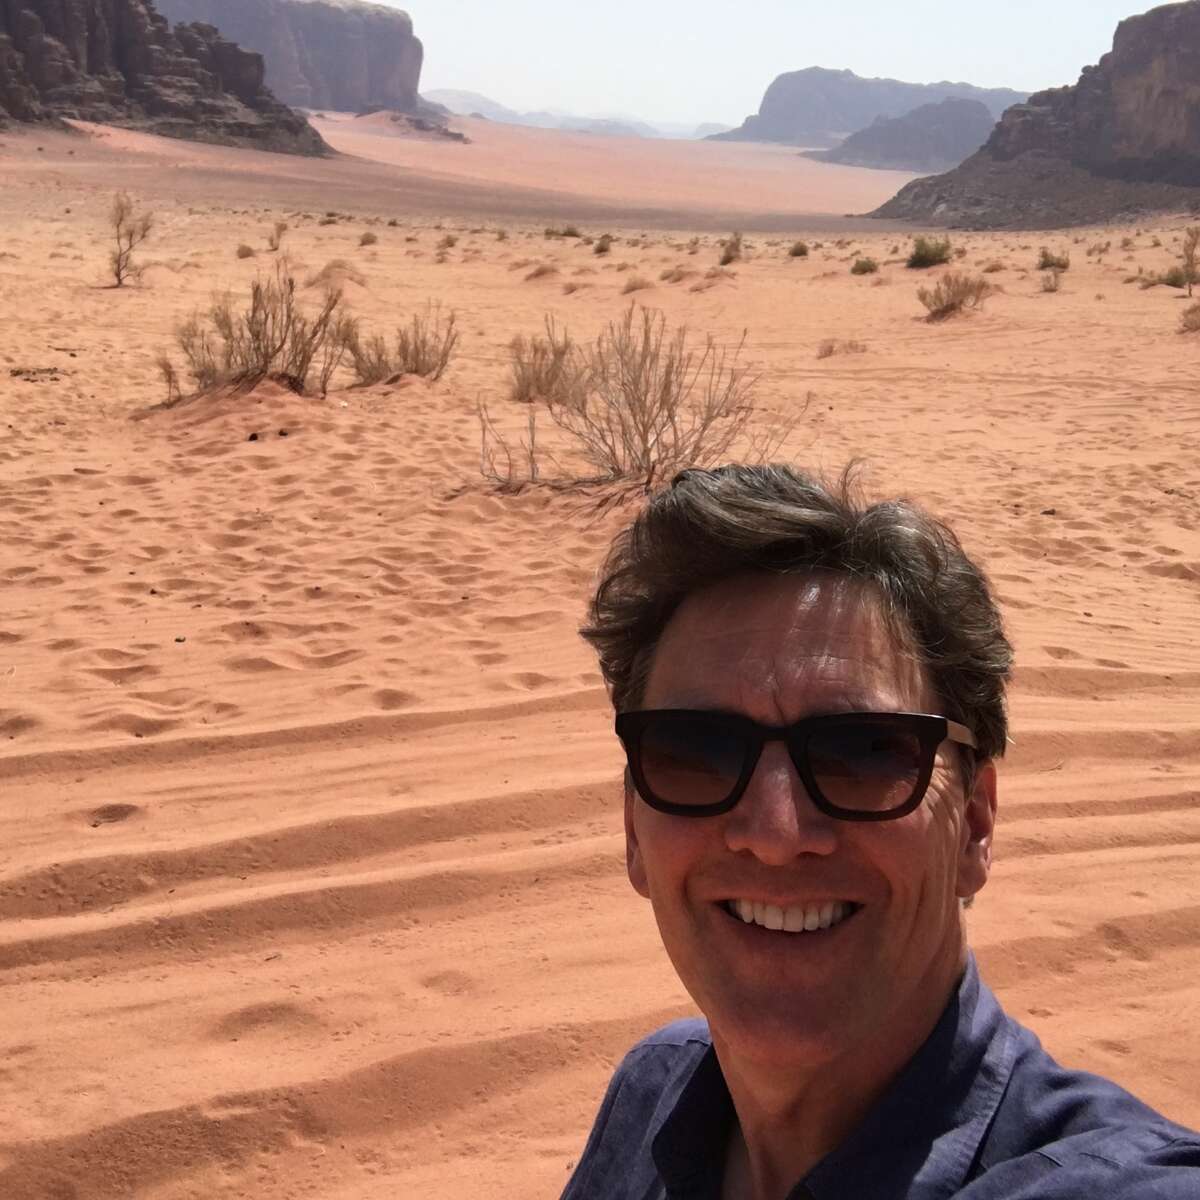 Actor-director-writer Andrew McCarthy stops for a selfie in Wadi Rum Protected Area, a desert wilderness in southern Jordan.